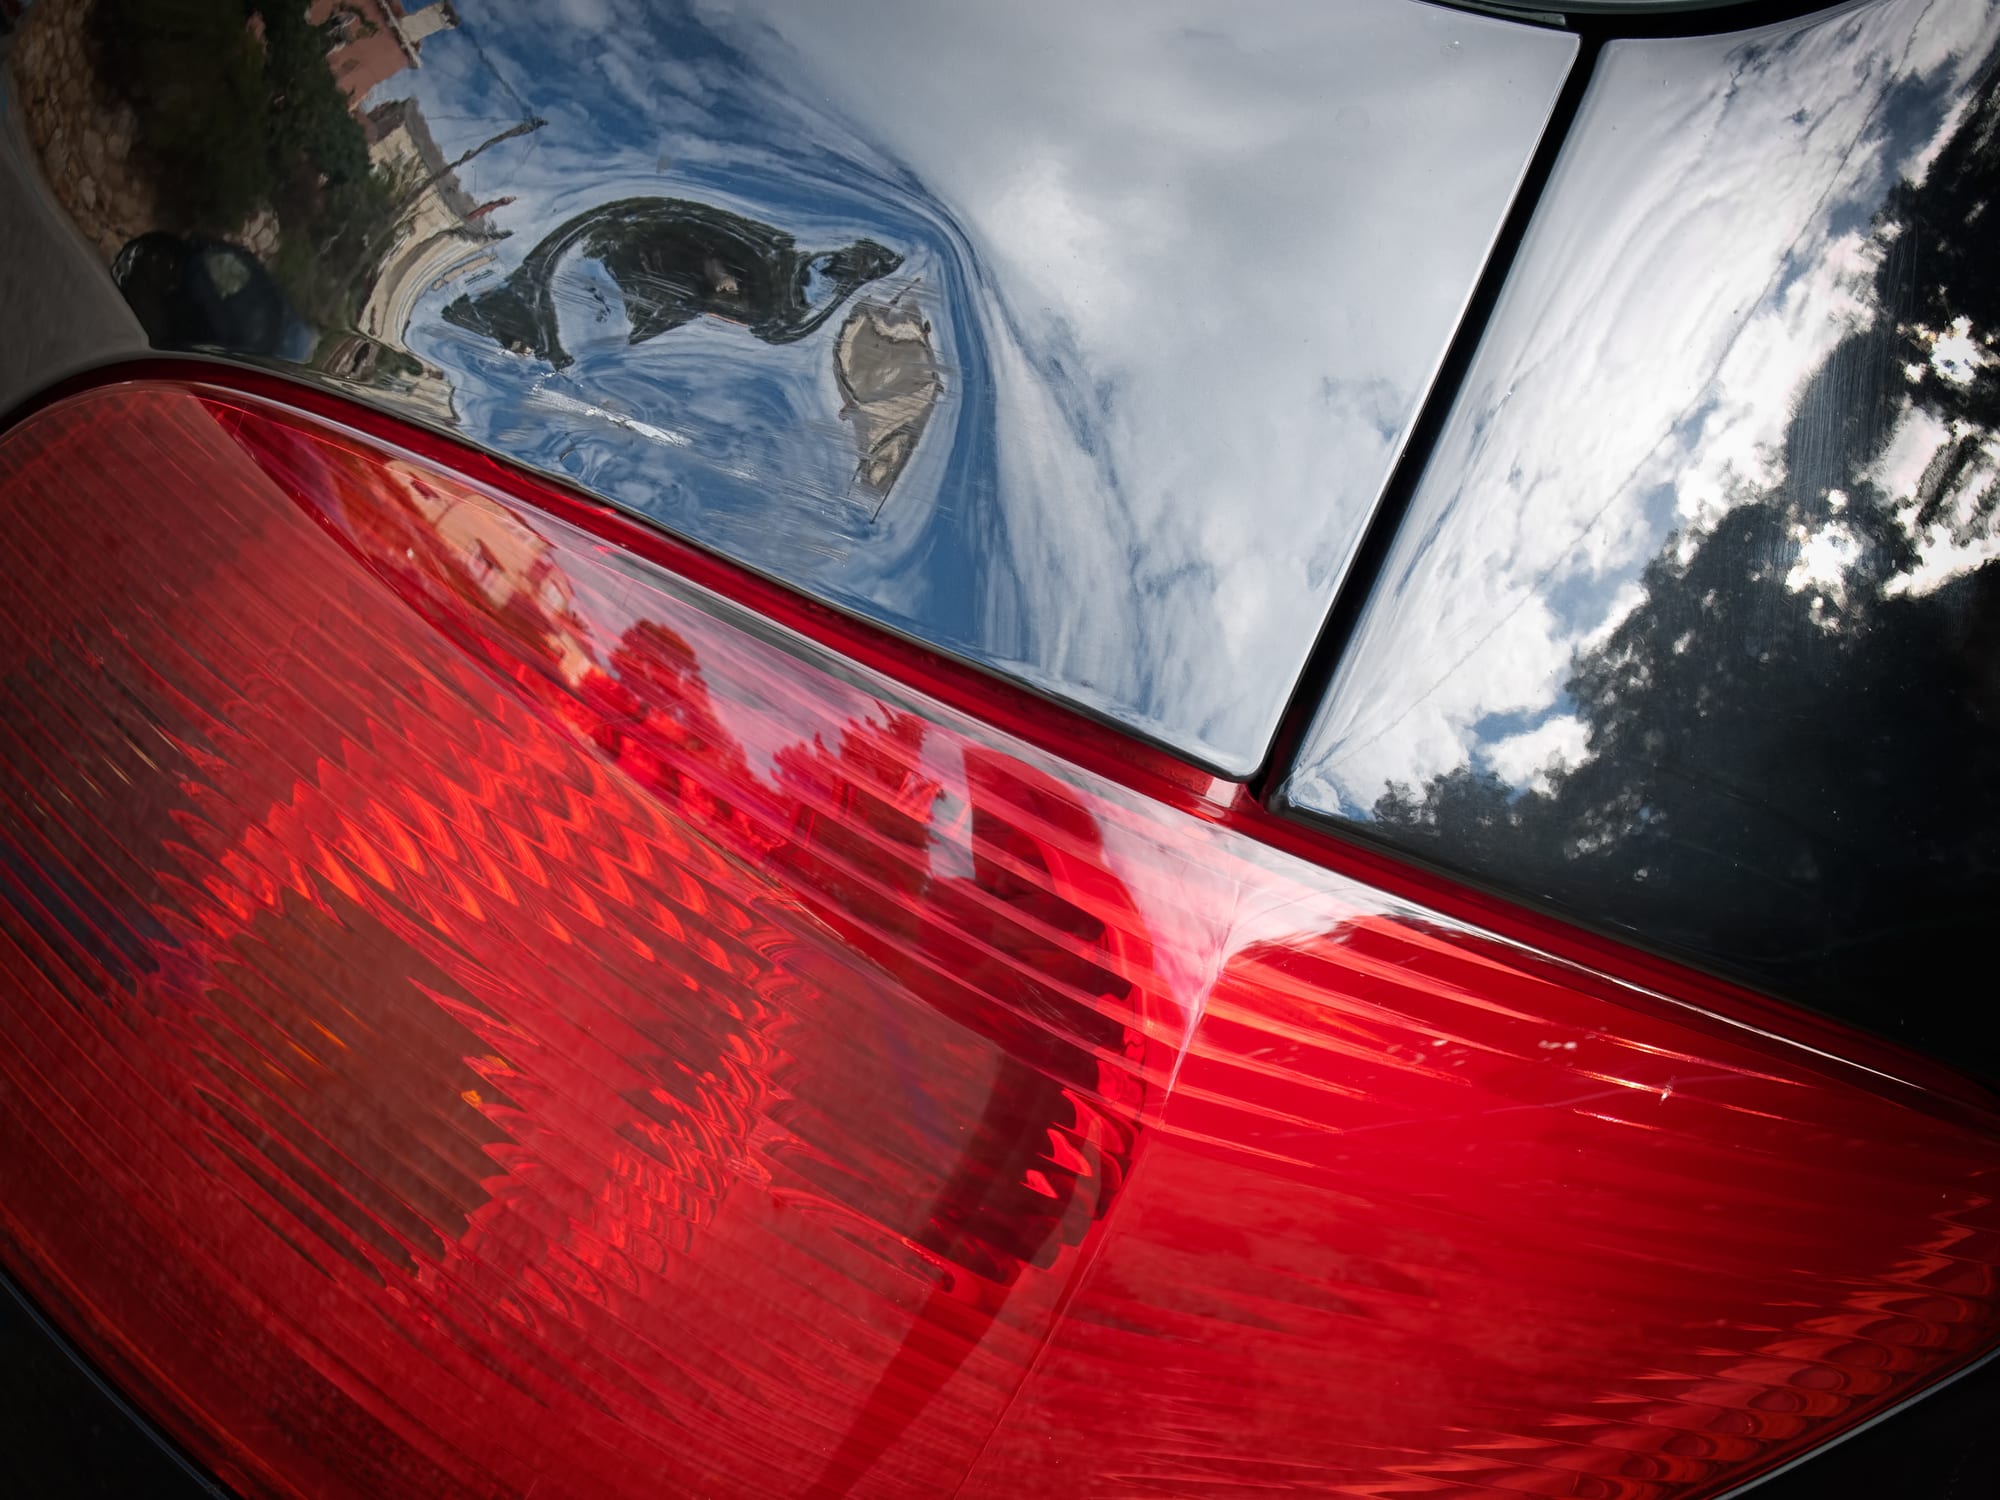 Carolina Collision and Frame Service | Red tail light on a black car with a dented panel